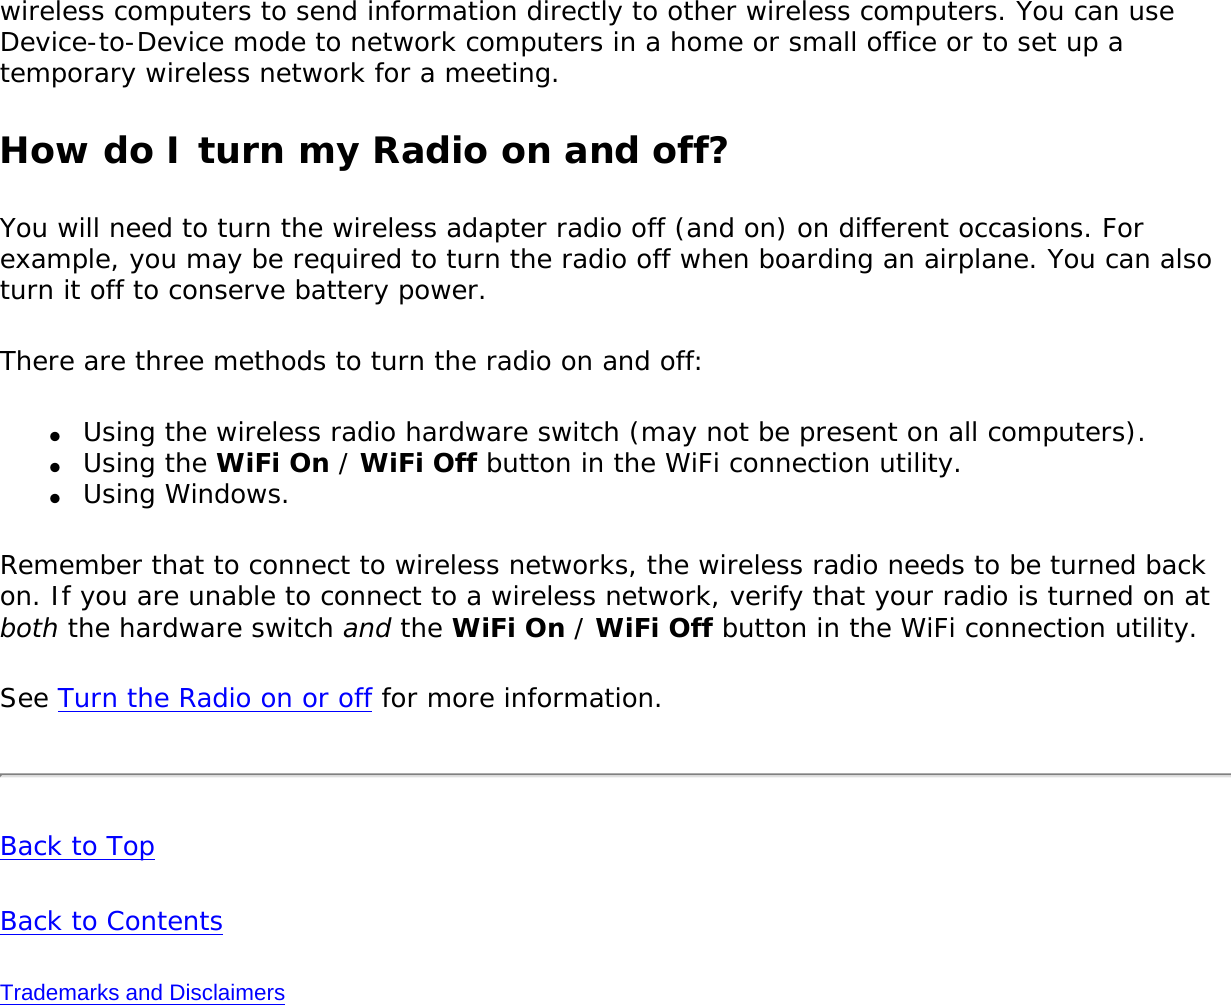 wireless computers to send information directly to other wireless computers. You can use Device-to-Device mode to network computers in a home or small office or to set up a temporary wireless network for a meeting. How do I turn my Radio on and off?You will need to turn the wireless adapter radio off (and on) on different occasions. For example, you may be required to turn the radio off when boarding an airplane. You can also turn it off to conserve battery power. There are three methods to turn the radio on and off:●     Using the wireless radio hardware switch (may not be present on all computers). ●     Using the WiFi On / WiFi Off button in the WiFi connection utility.●     Using Windows.Remember that to connect to wireless networks, the wireless radio needs to be turned back on. If you are unable to connect to a wireless network, verify that your radio is turned on at both the hardware switch and the WiFi On / WiFi Off button in the WiFi connection utility.See Turn the Radio on or off for more information.Back to TopBack to ContentsTrademarks and Disclaimers